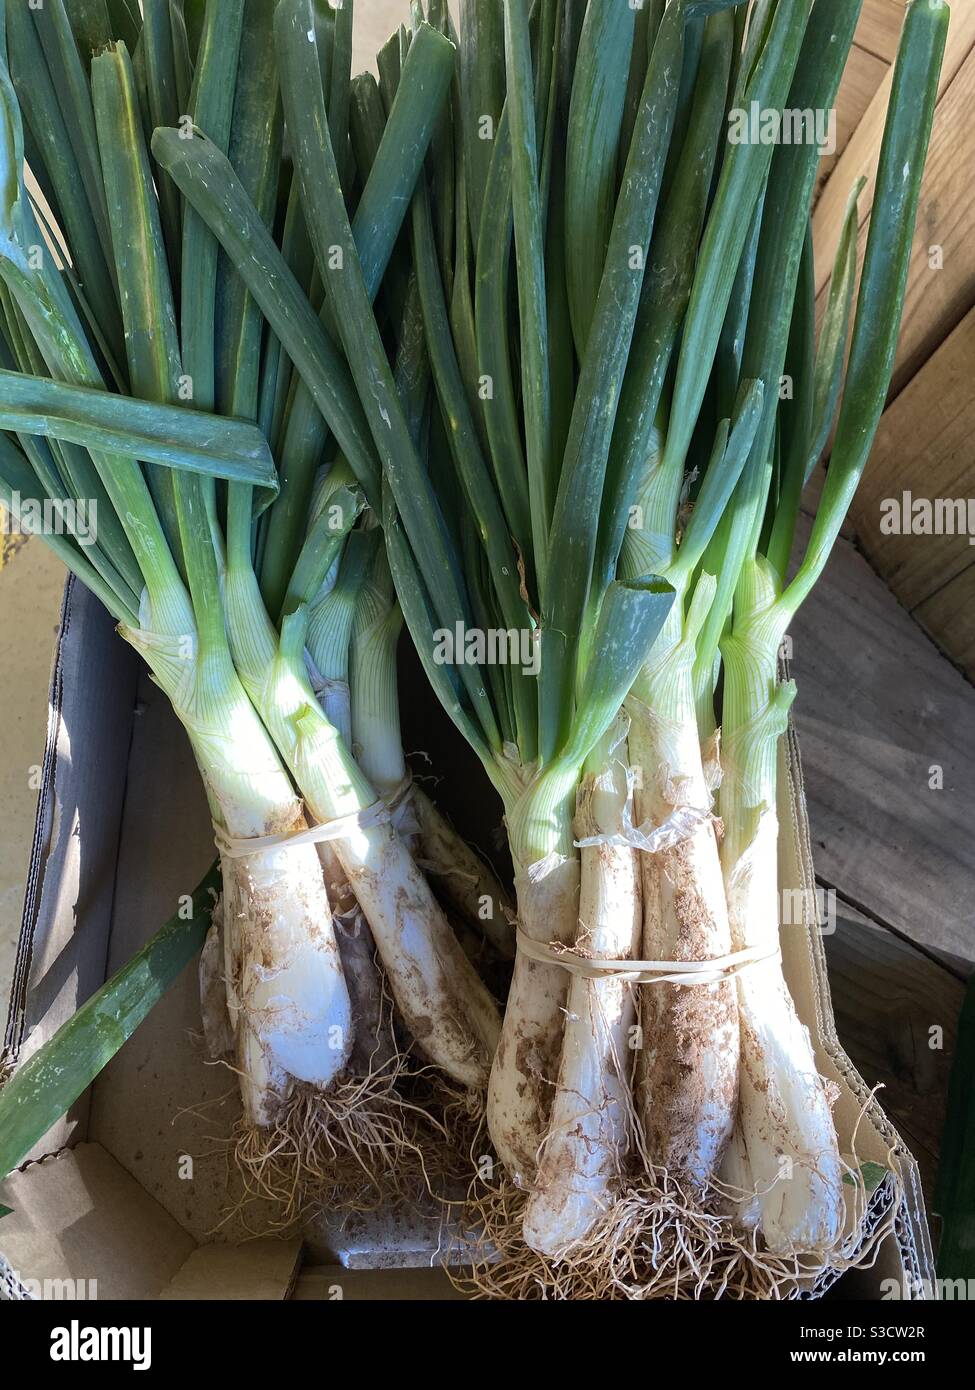 Two bunches of calçots photographed in ambient light Stock Photo